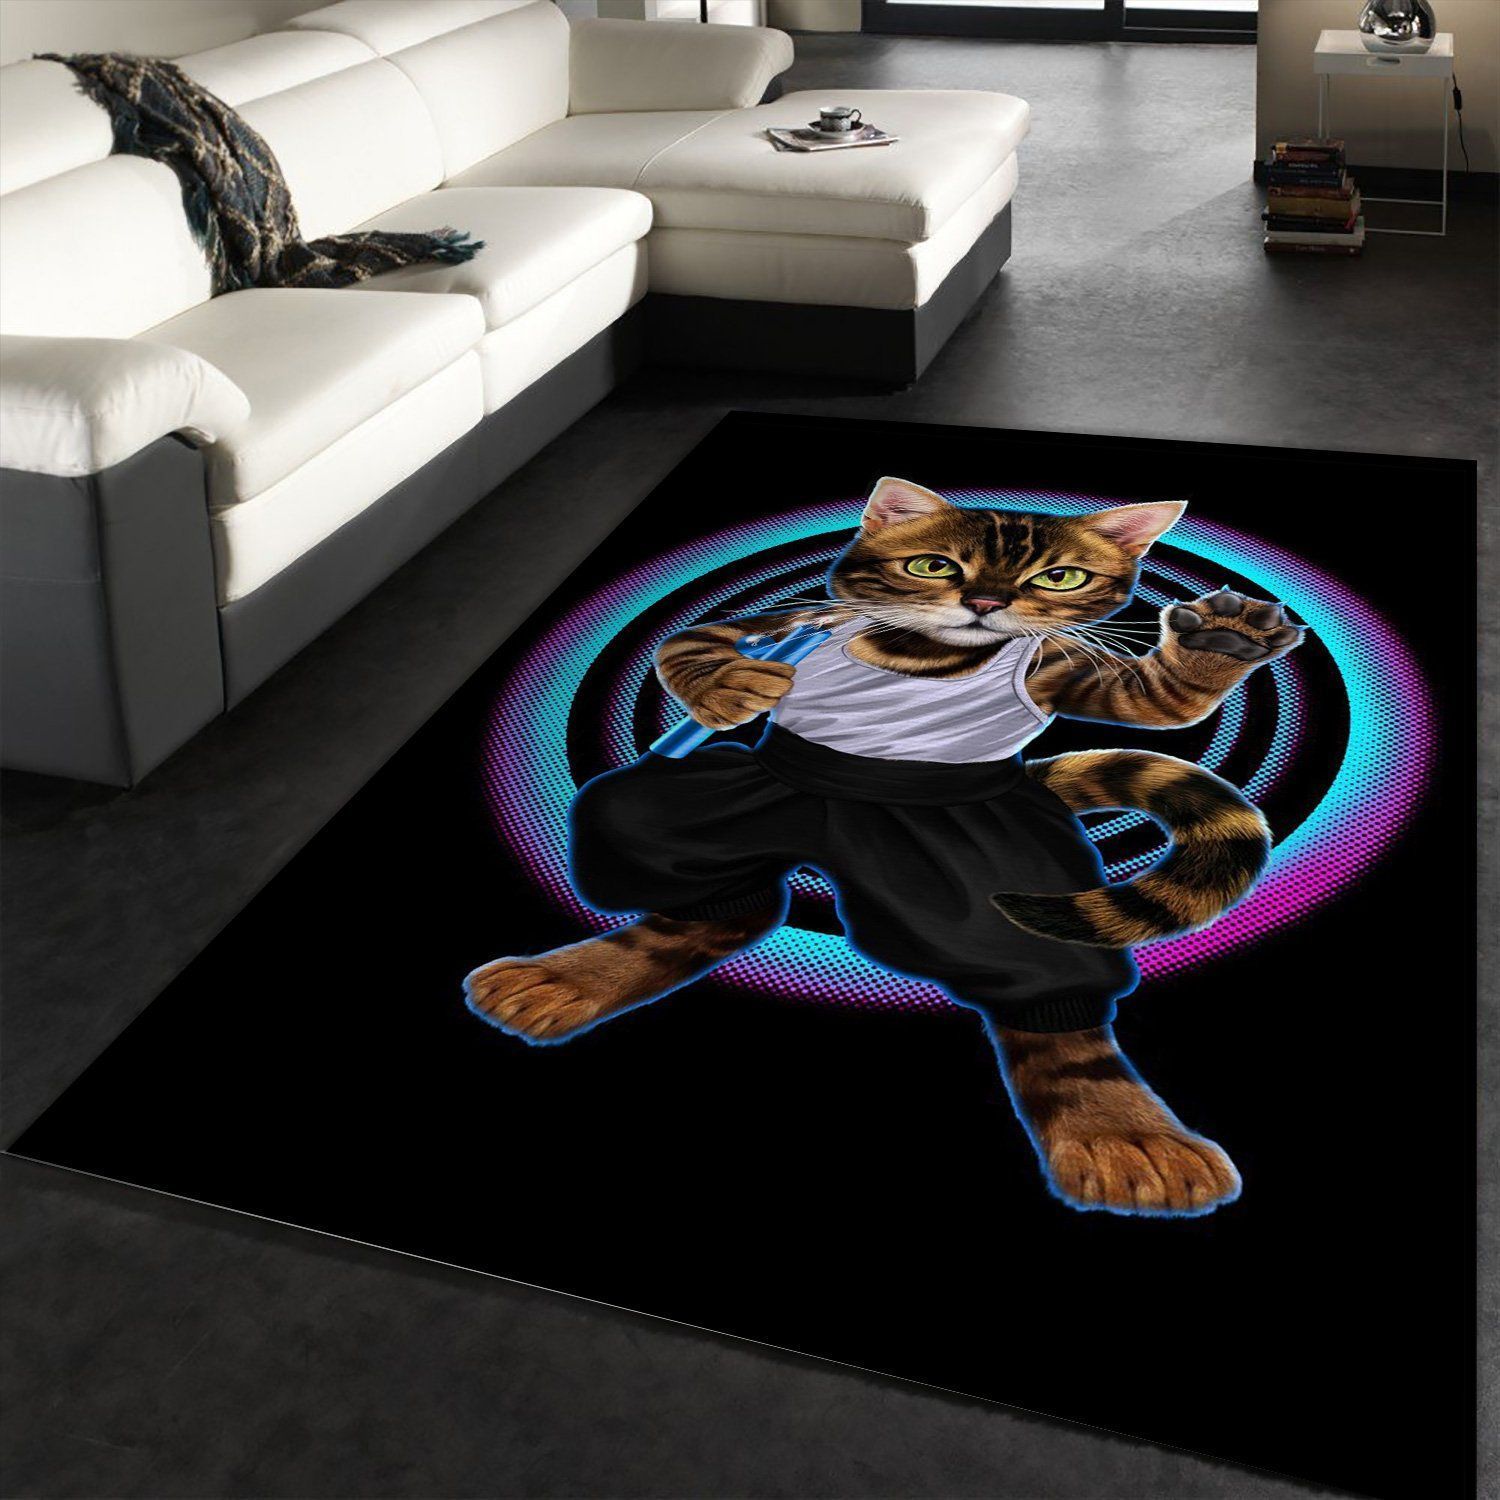 Kung Fu Bruce Cat Area Rug Living Room And Bedroom Rug Home Decor Floor Decor